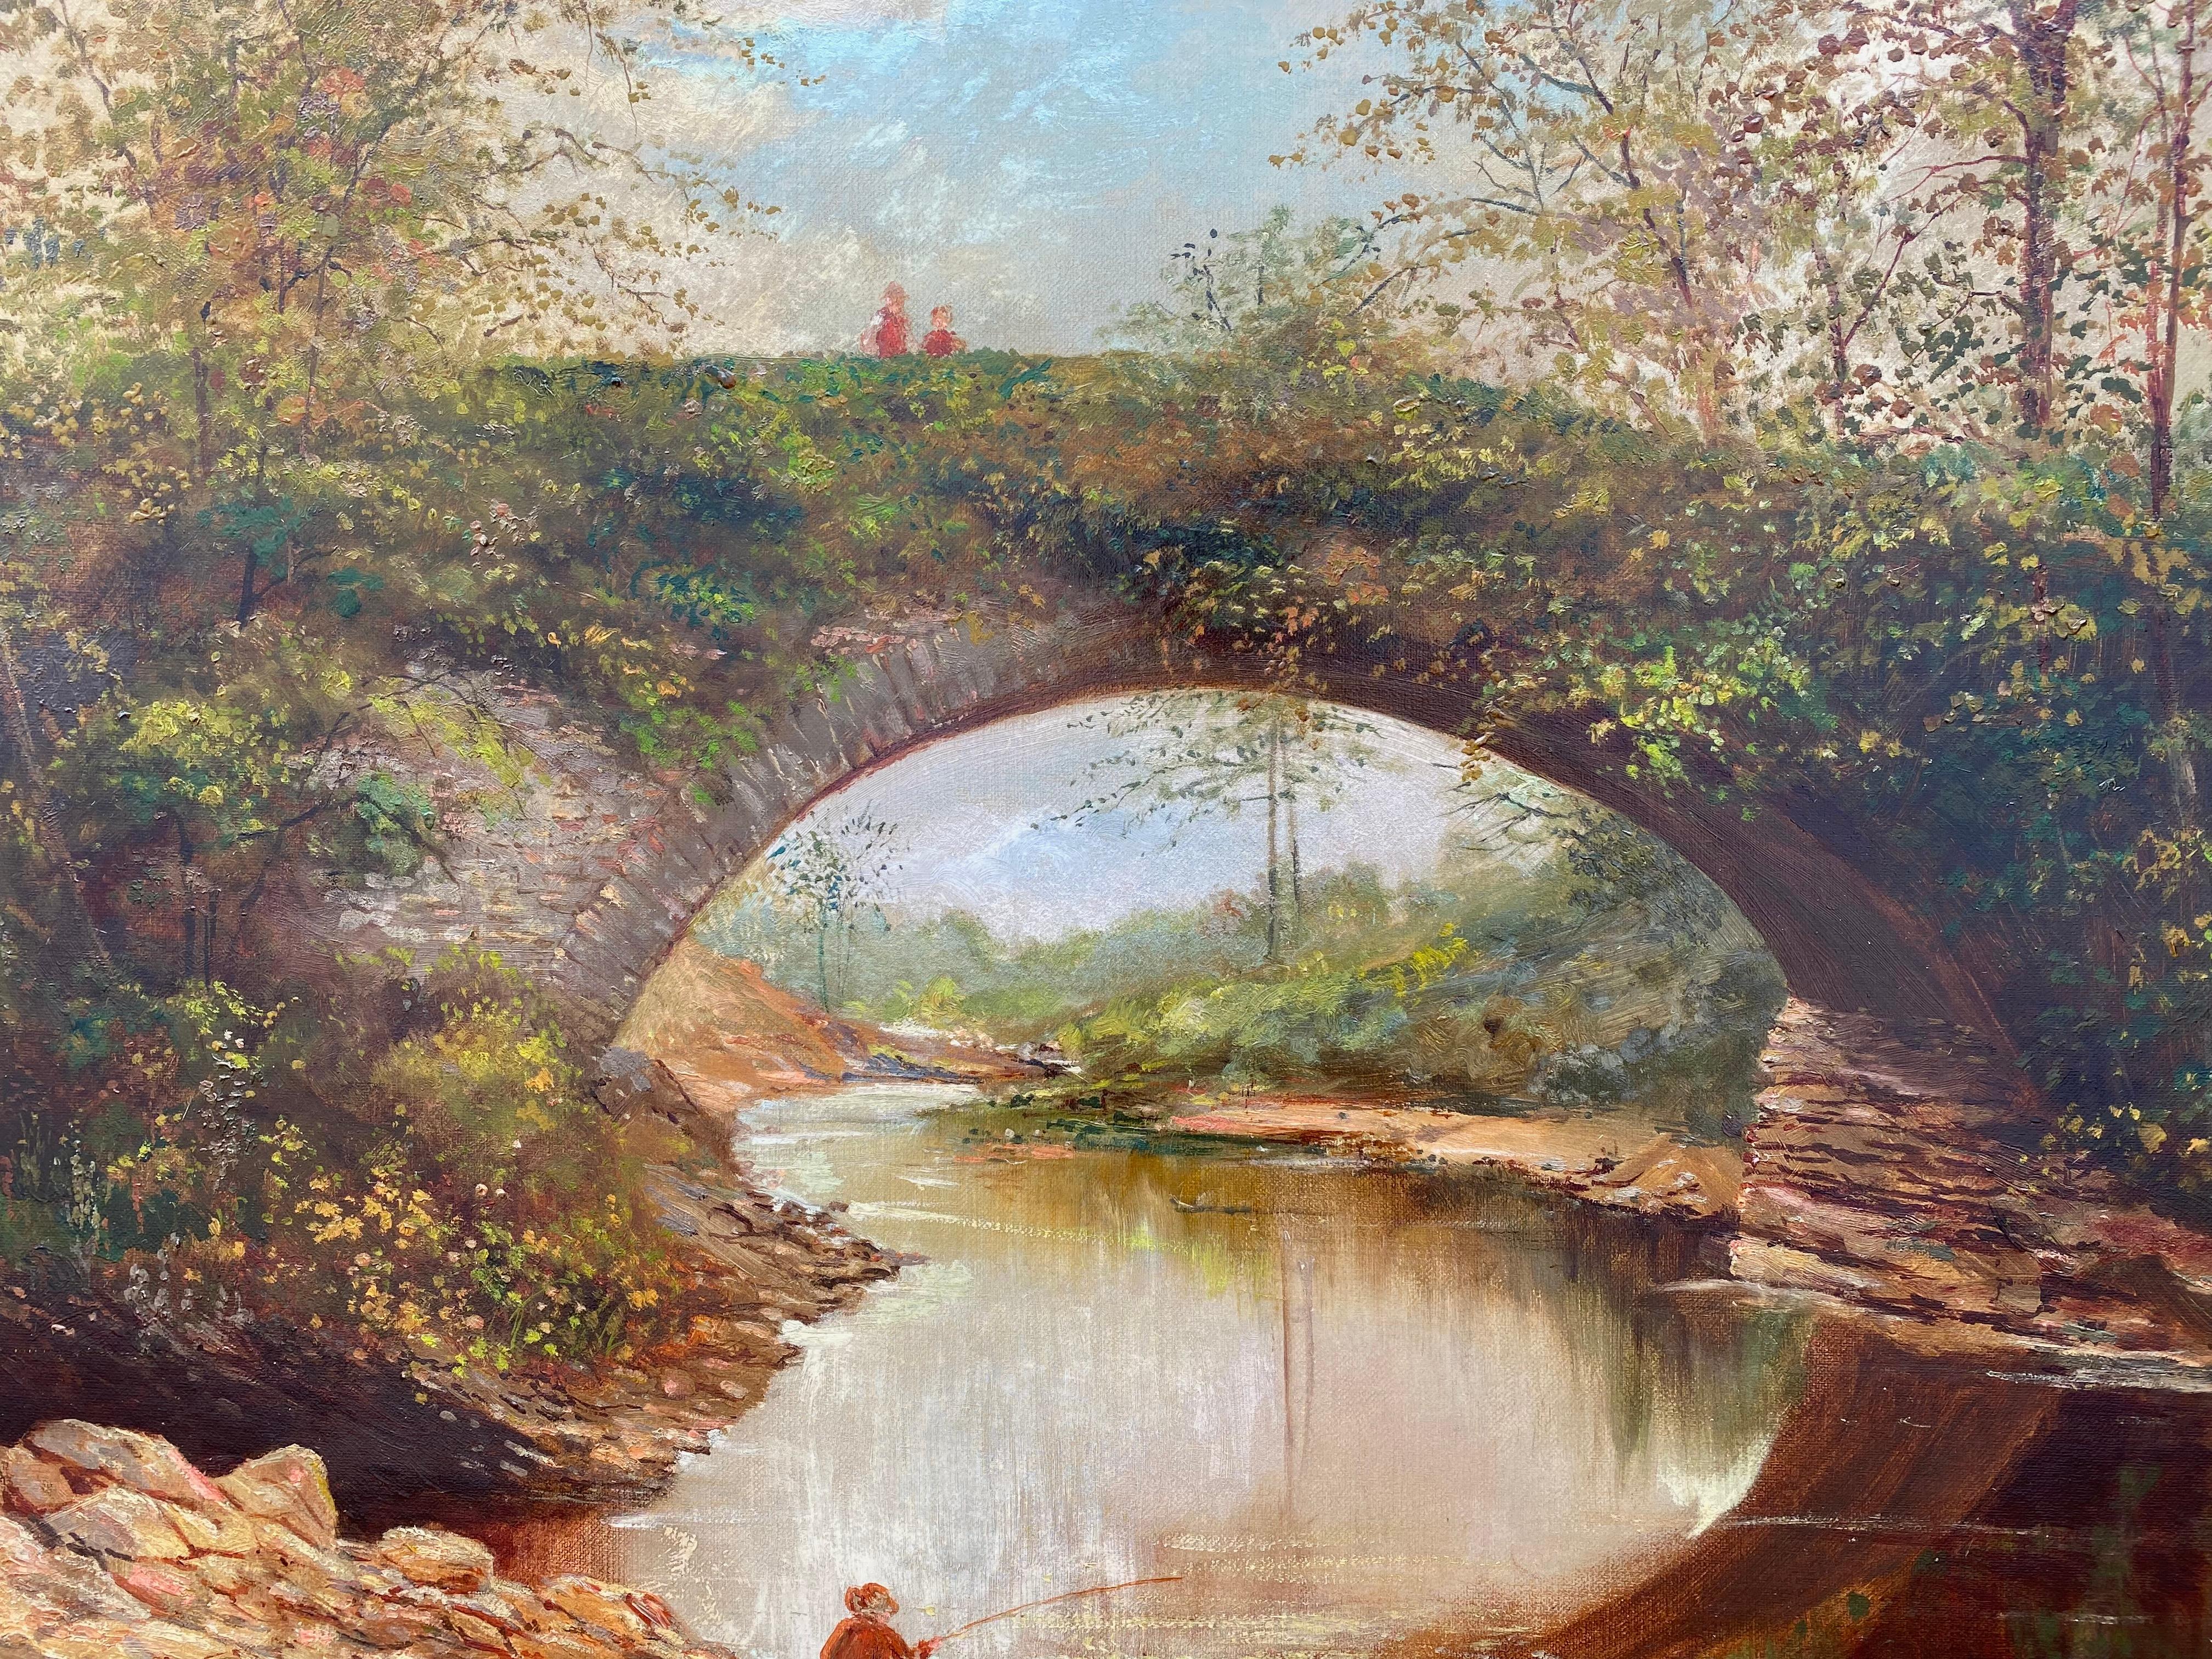 “The Old Bridge” - Brown Figurative Painting by William Livingstone Anderson